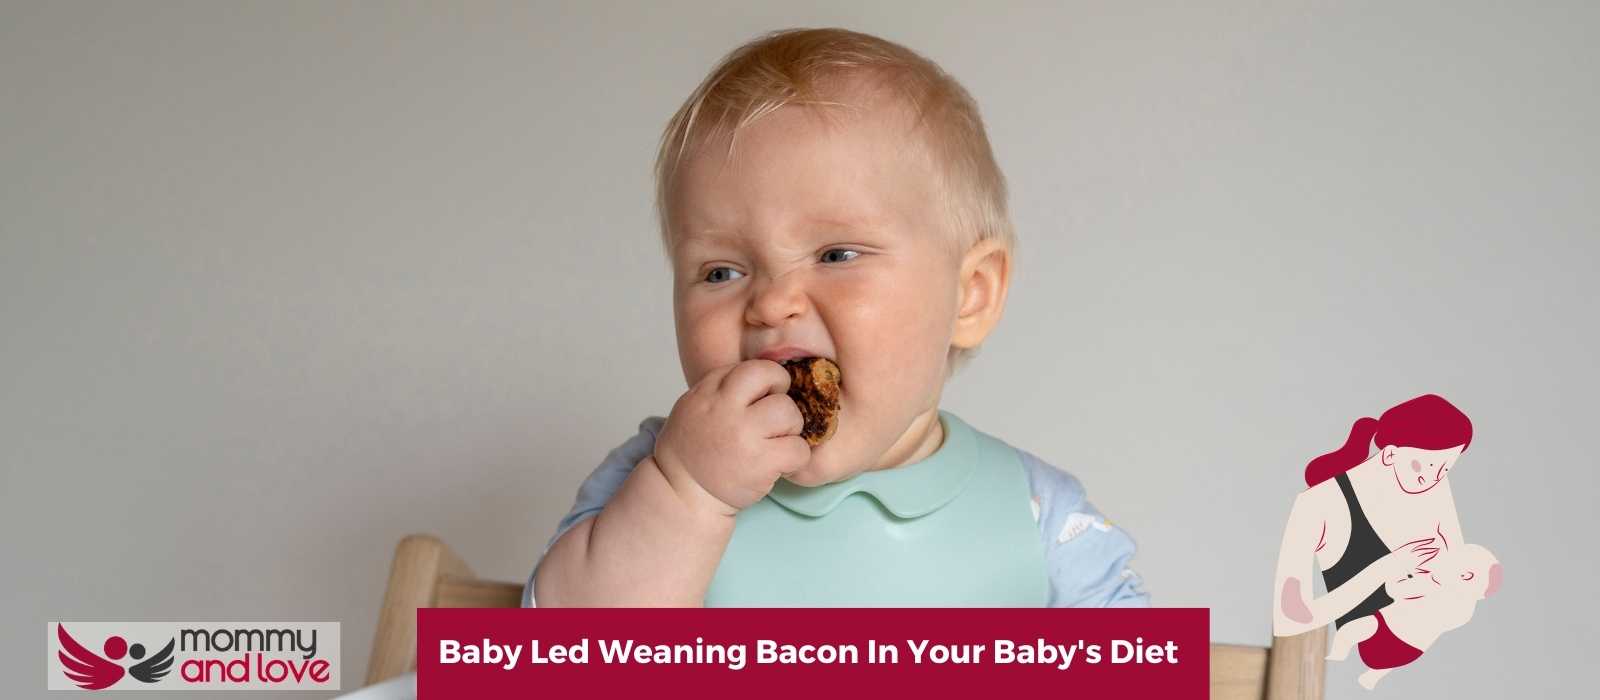 Baby Led Weaning Bacon In Your Baby's Diet